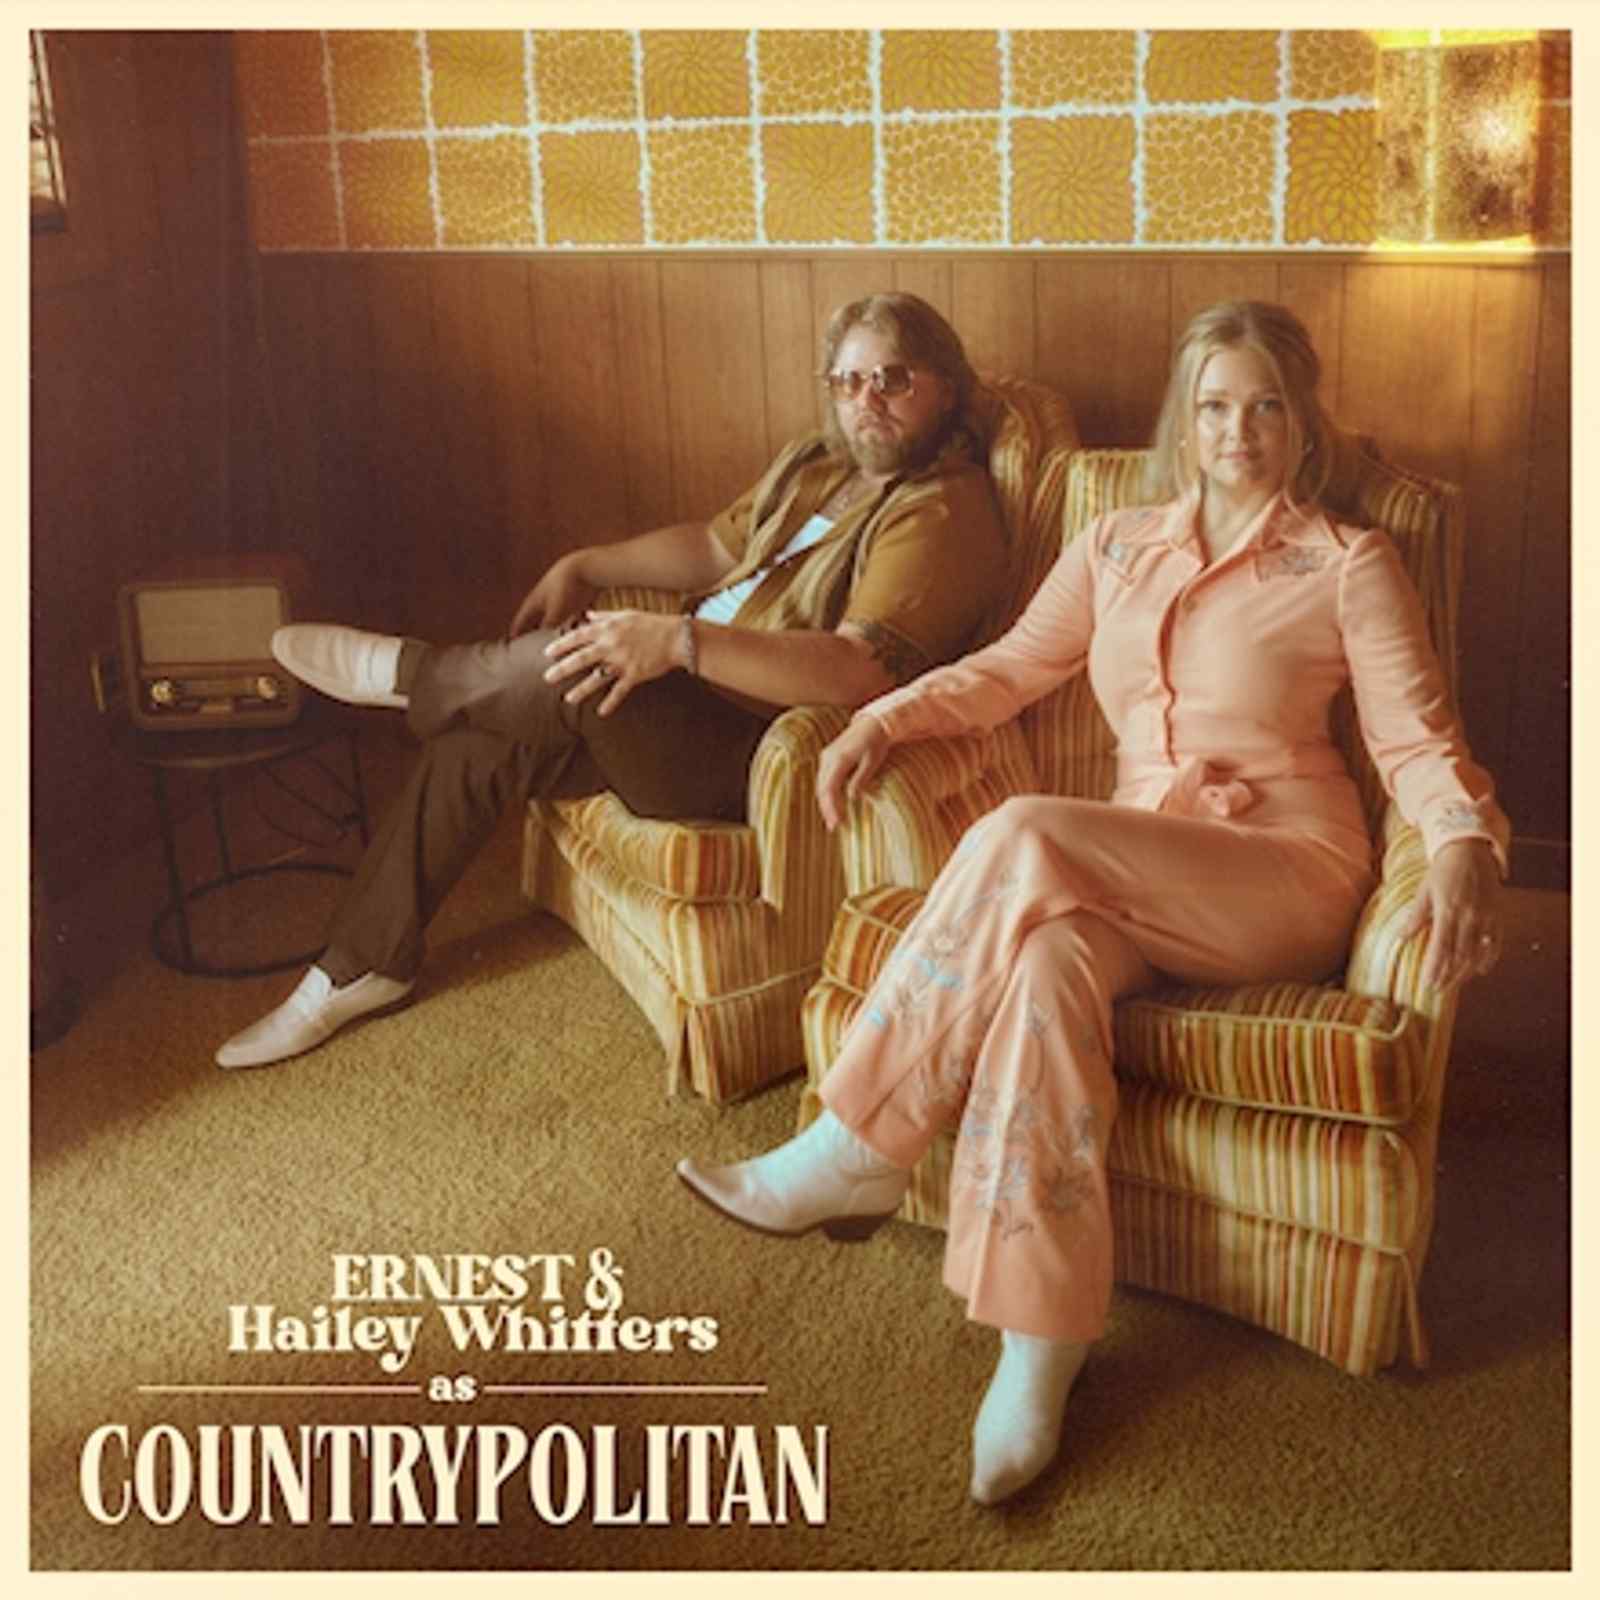 COUNTRYPOLITAN by ERNEST & Hailey Whitters